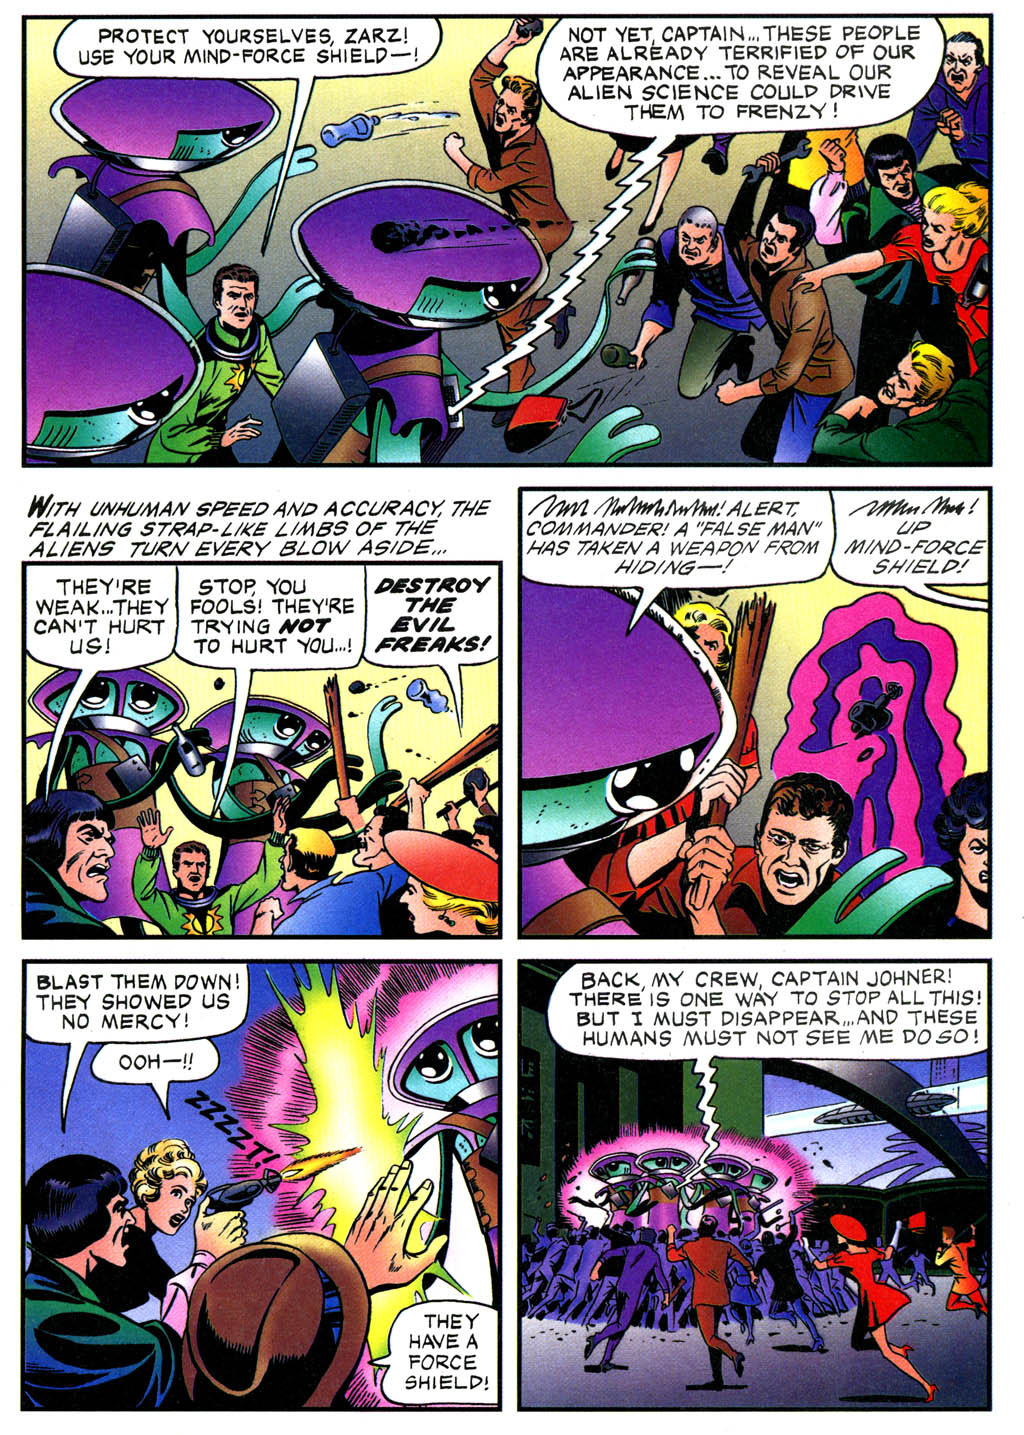 Captain Johner & the Aliens issue 2 - Page 25